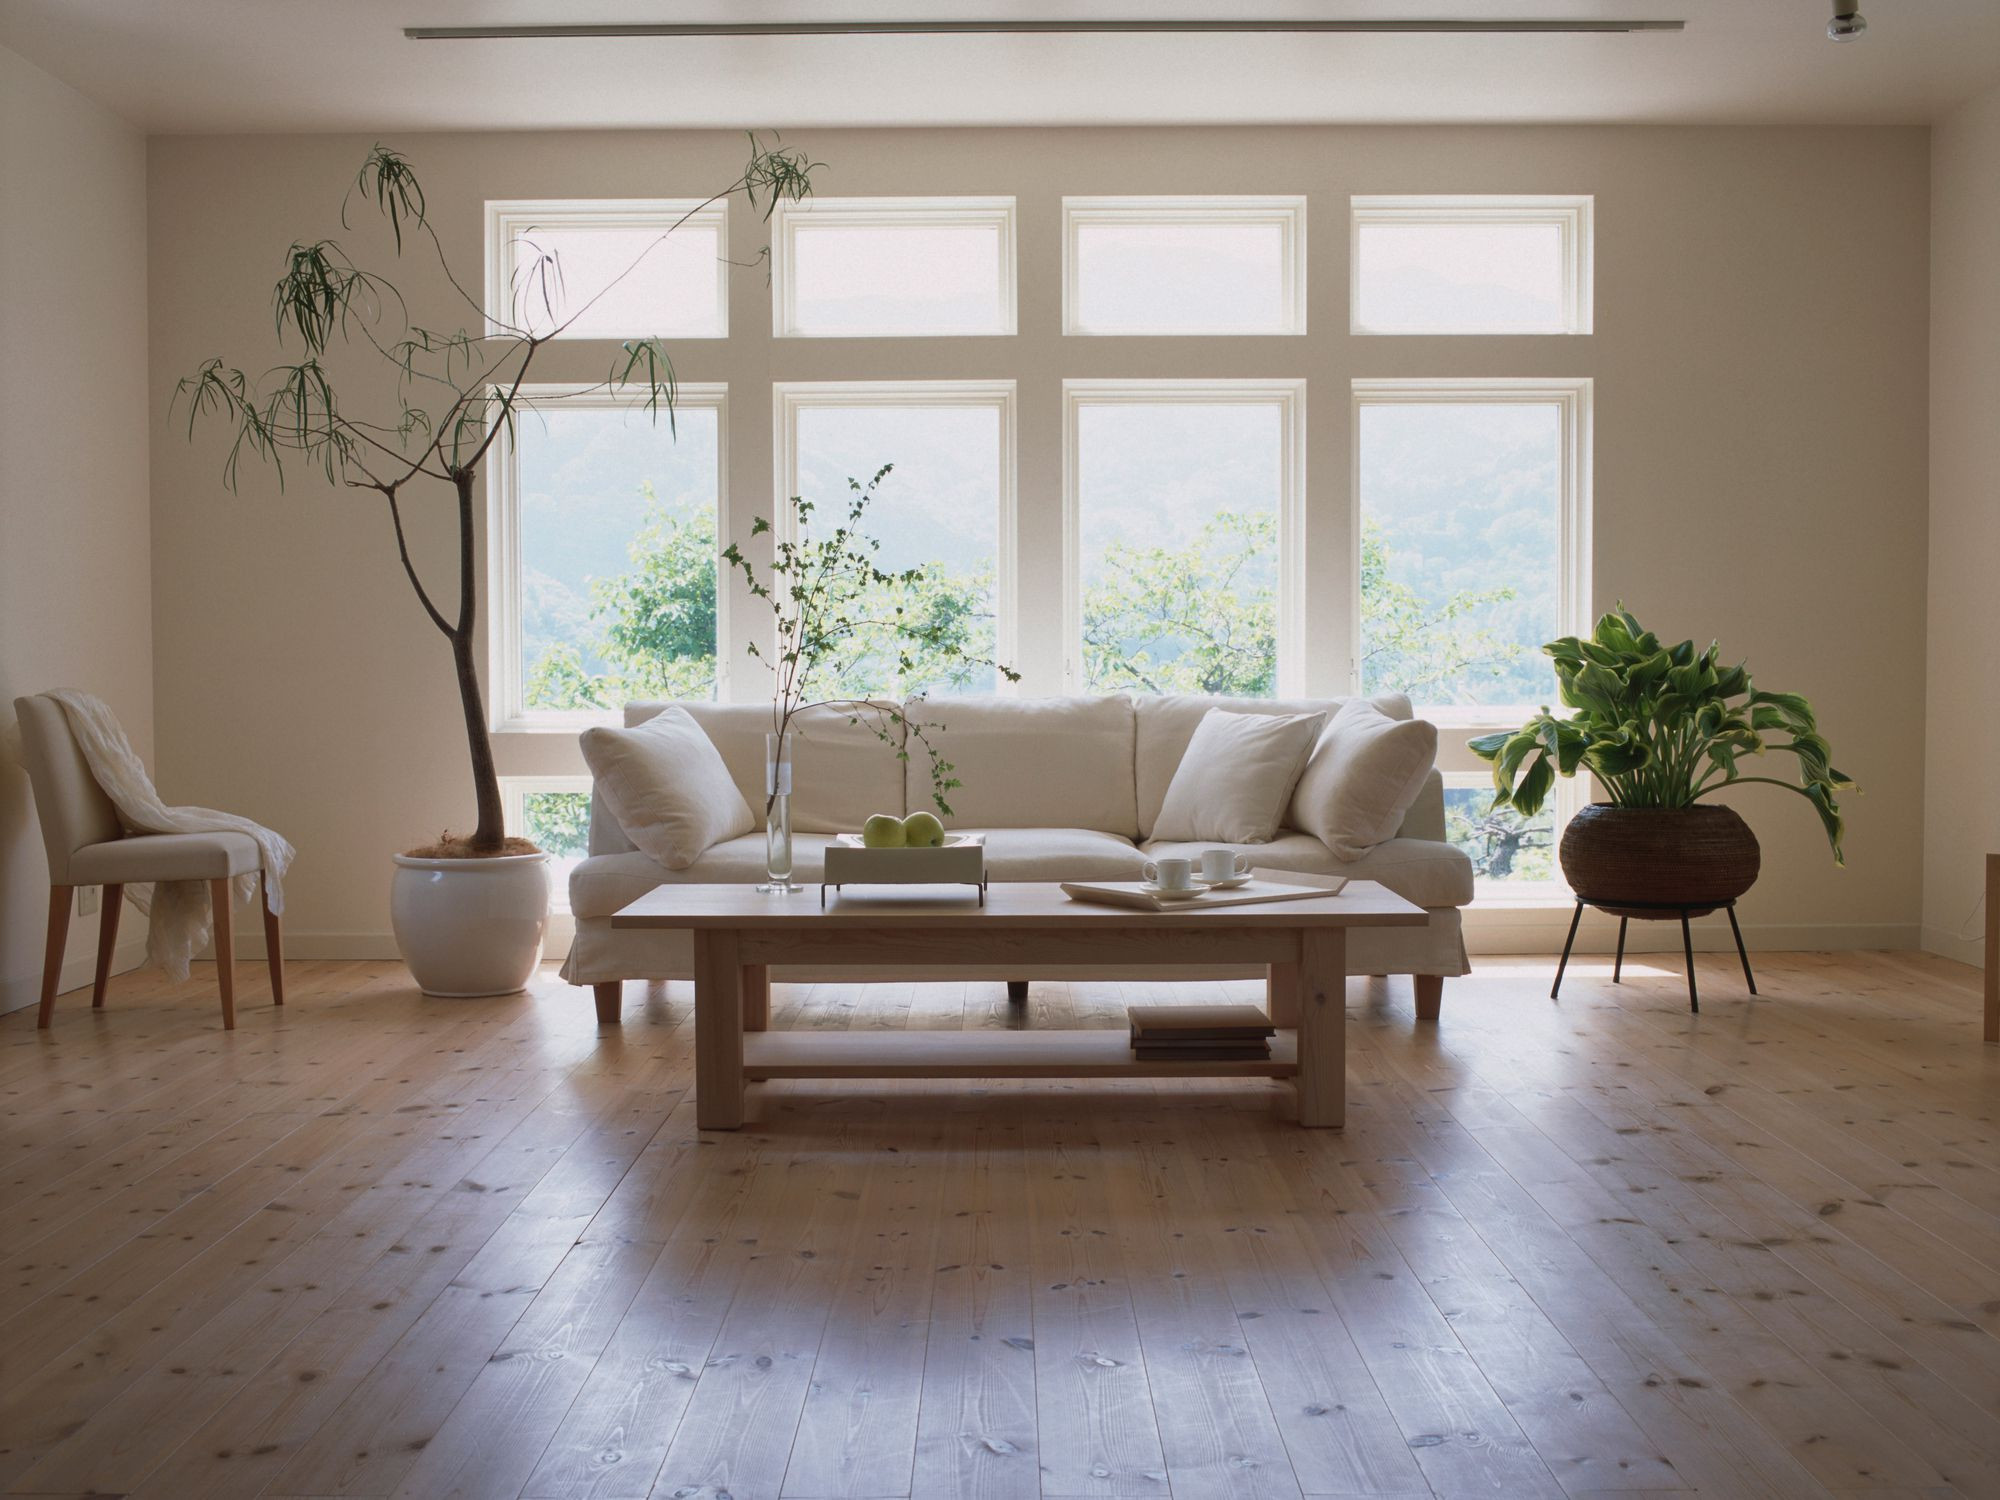 26 Lovable Grey Hardwood Floors Living Room 2024 free download grey hardwood floors living room of laminate flooring pros and cons for living room laminate floor gettyimages dexph070 001 58b5cc793df78cdcd8be2938